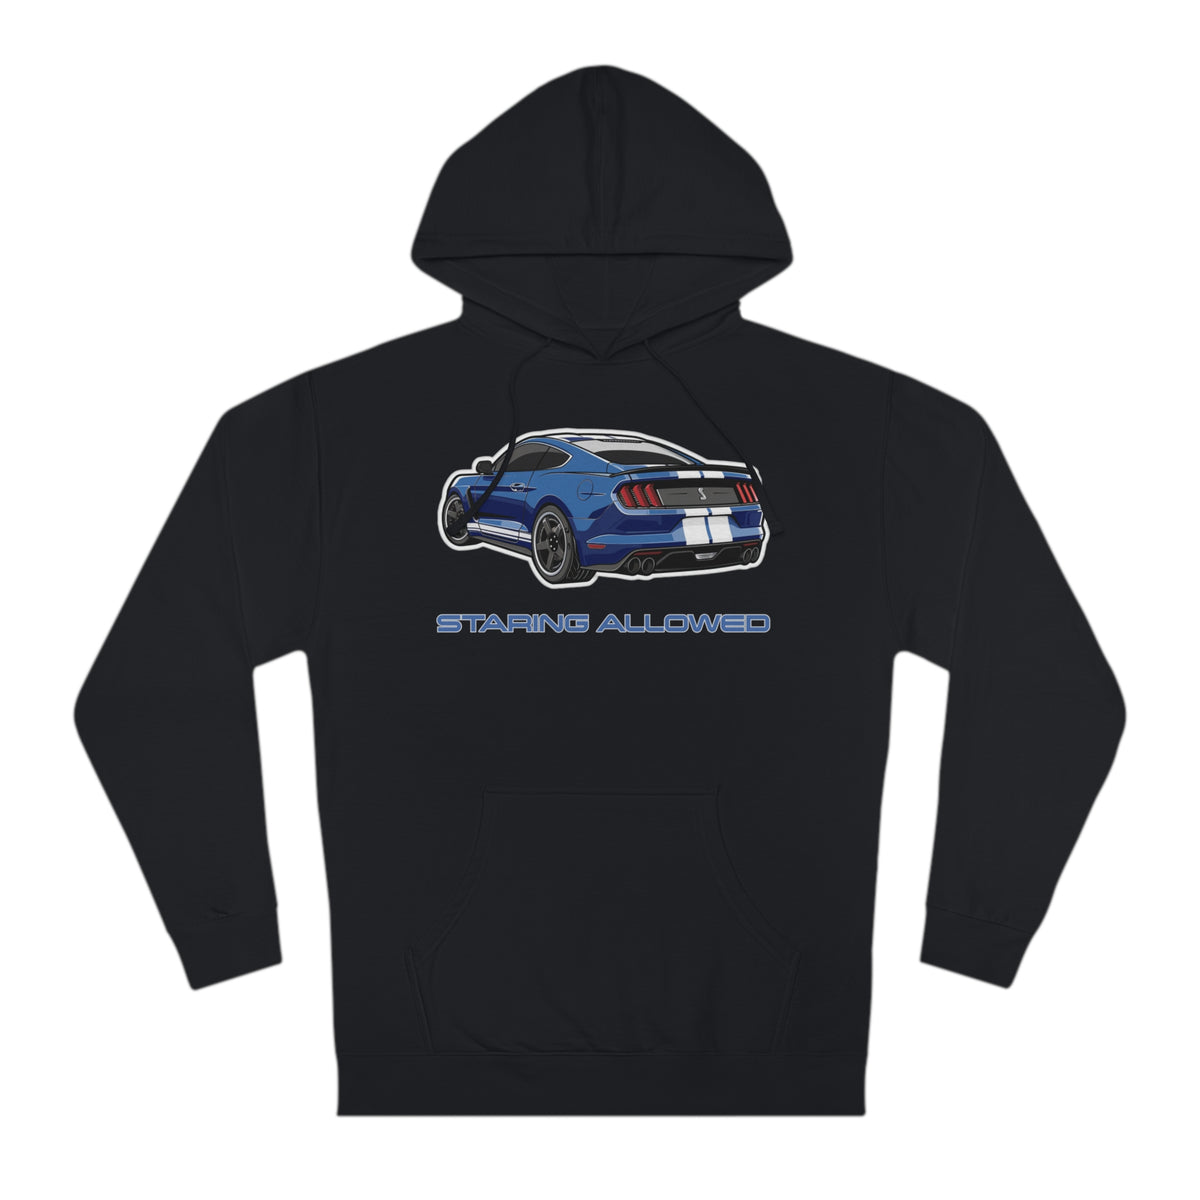 Admire the Power: Shelby GT350 Hoodie - Envy of the Streets Hooded Sweatshirt